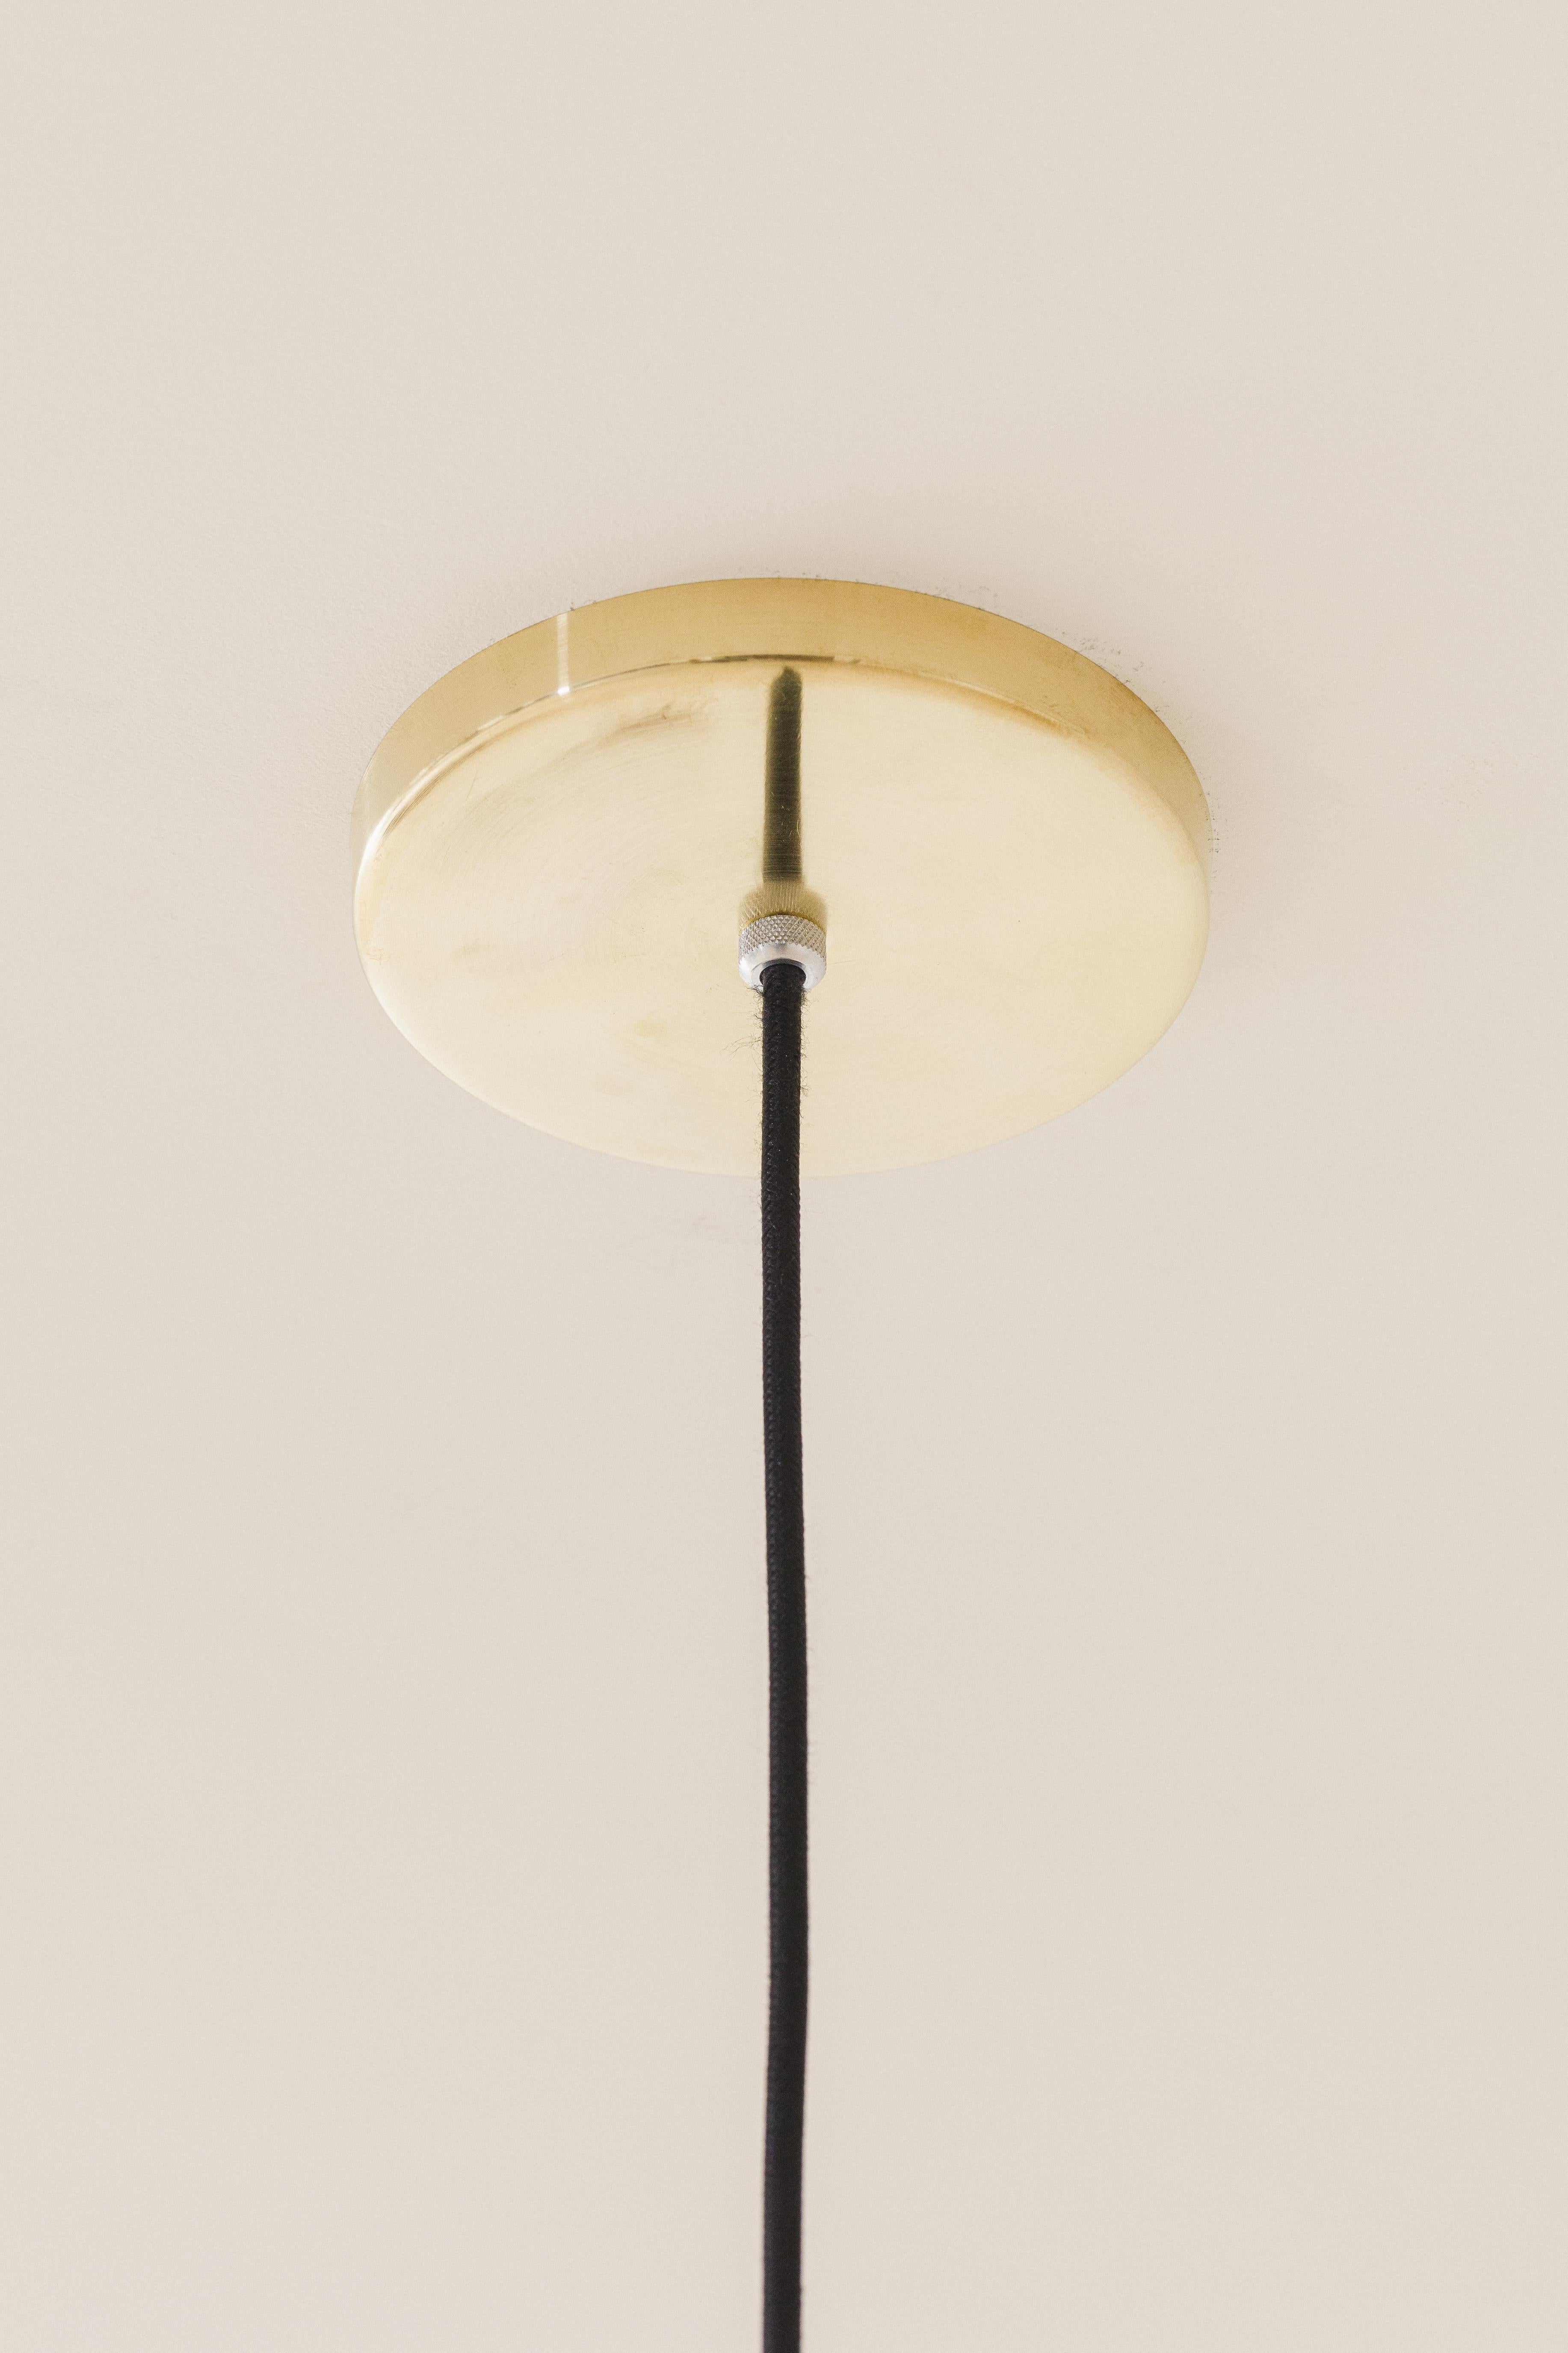 Vintage Pendant Lamp by Lustres Pelotas, Brass and Prismatic Glass, Brazil 1950s For Sale 3